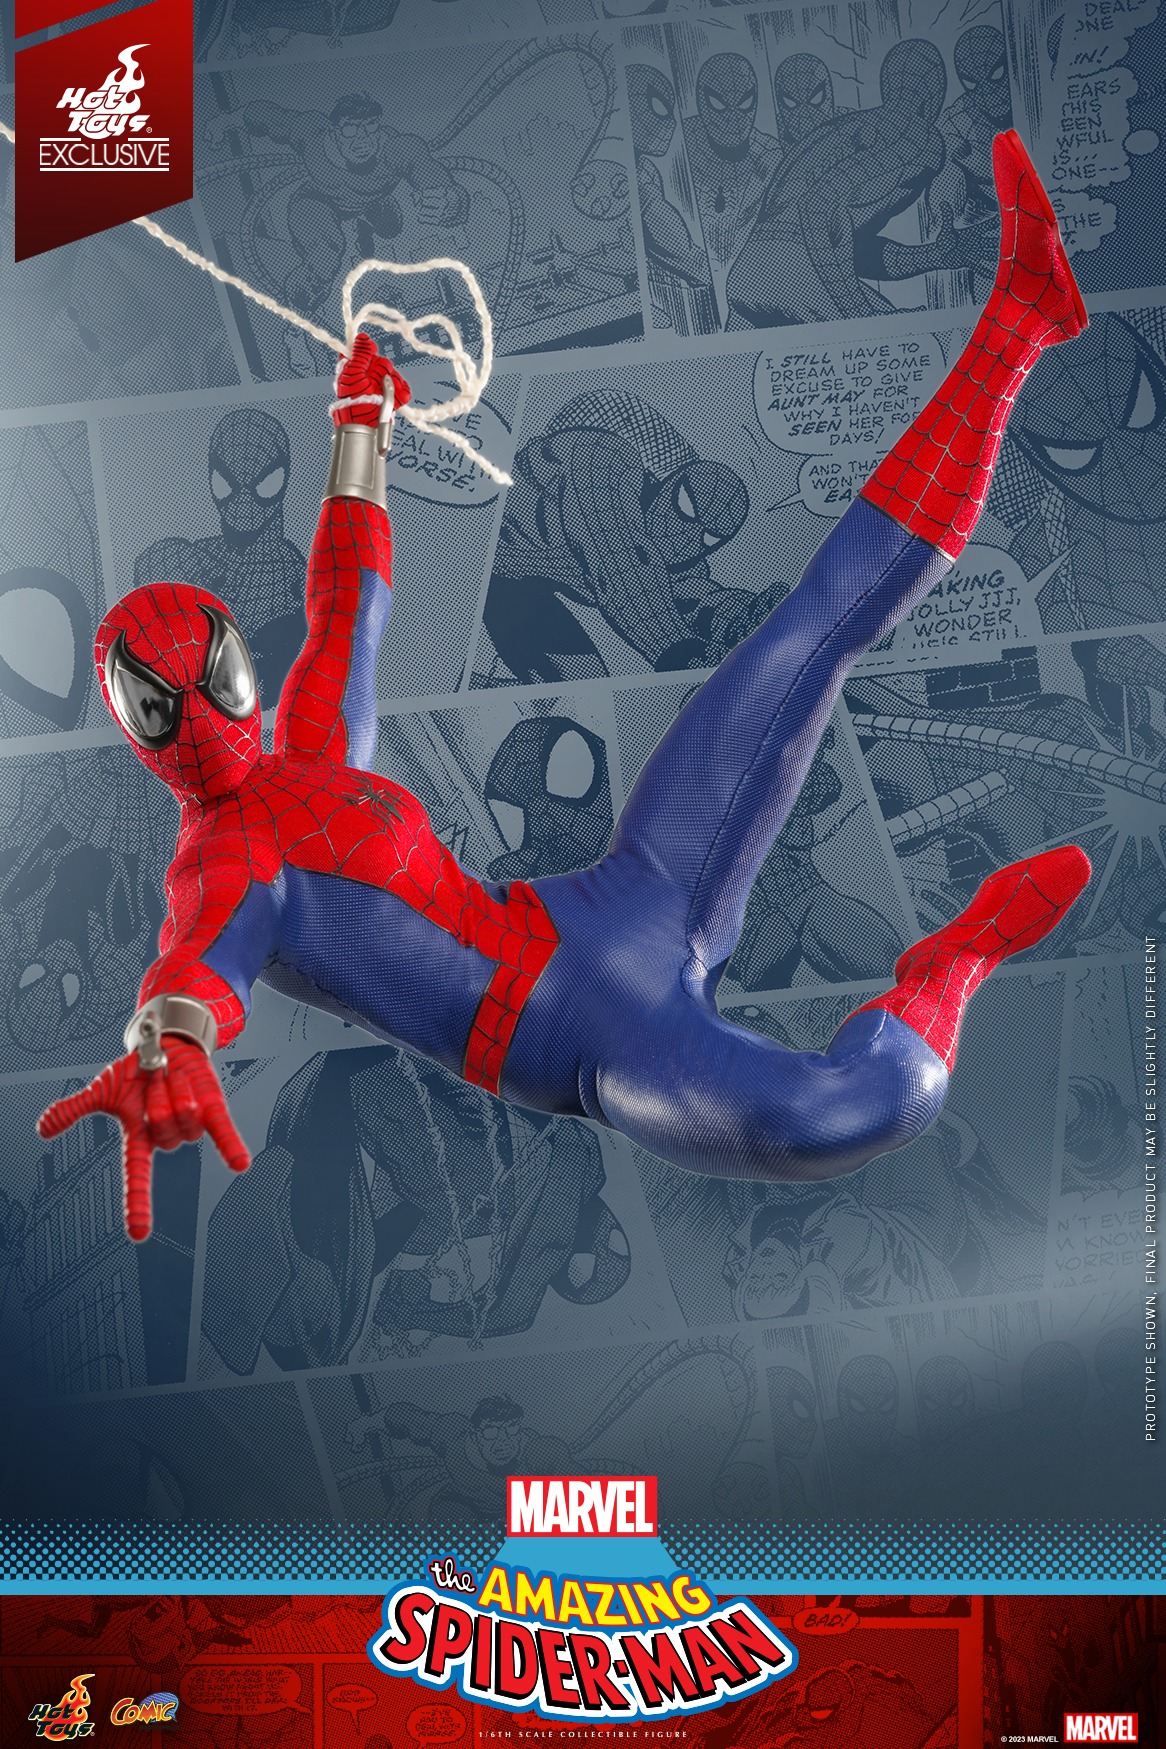 May be an illustration of vulture, toy and text that says 'HO EXCLUSIVE MARVEL SPIDER-MAN the AMAZING COMIC MARVEL'